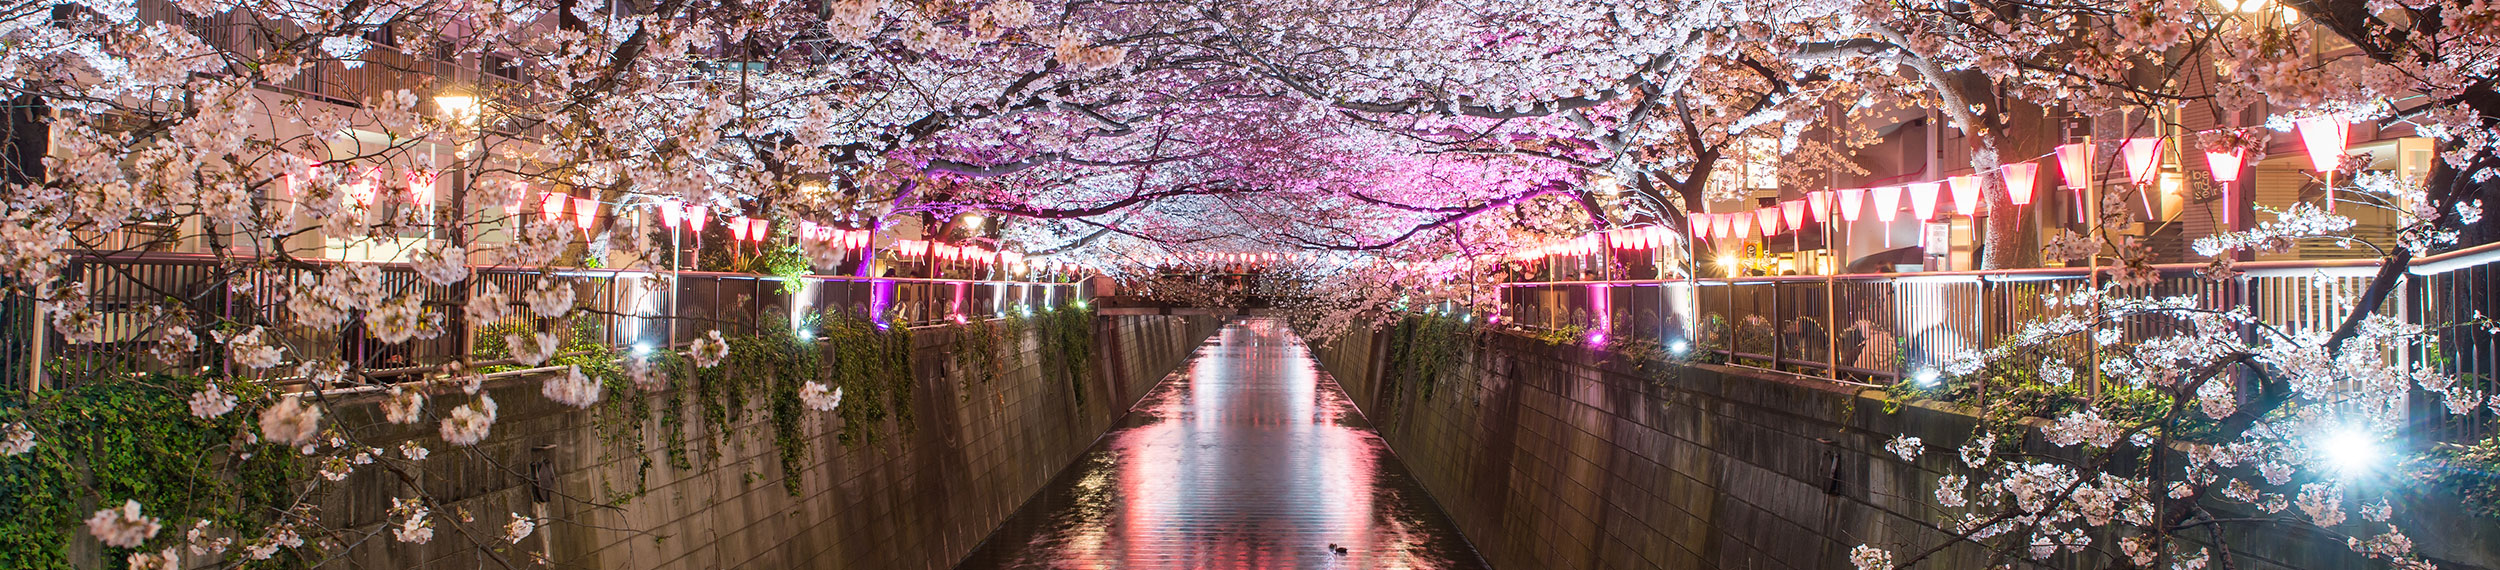 Pink cherry blossoms creating a pink canopy over the Meguro Canal in Tokyo, Japan.